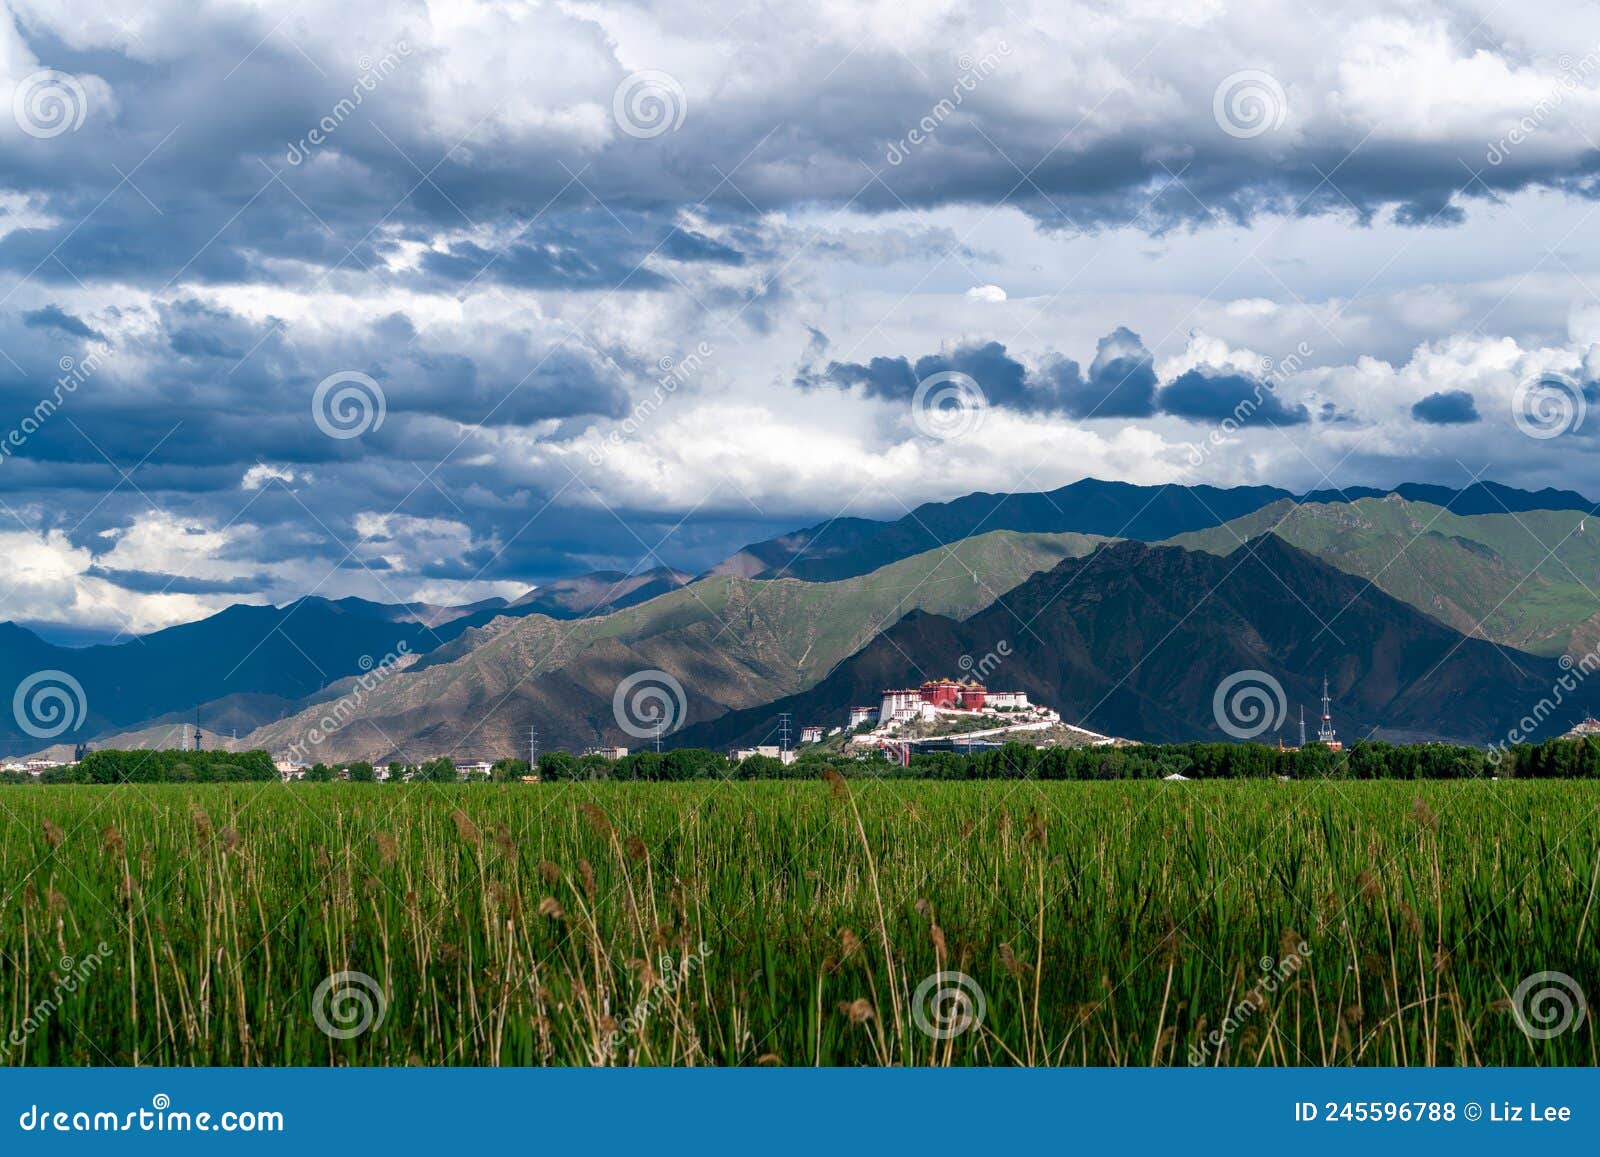 the potala palace, the holy place of tibetan buddhism under the mountains